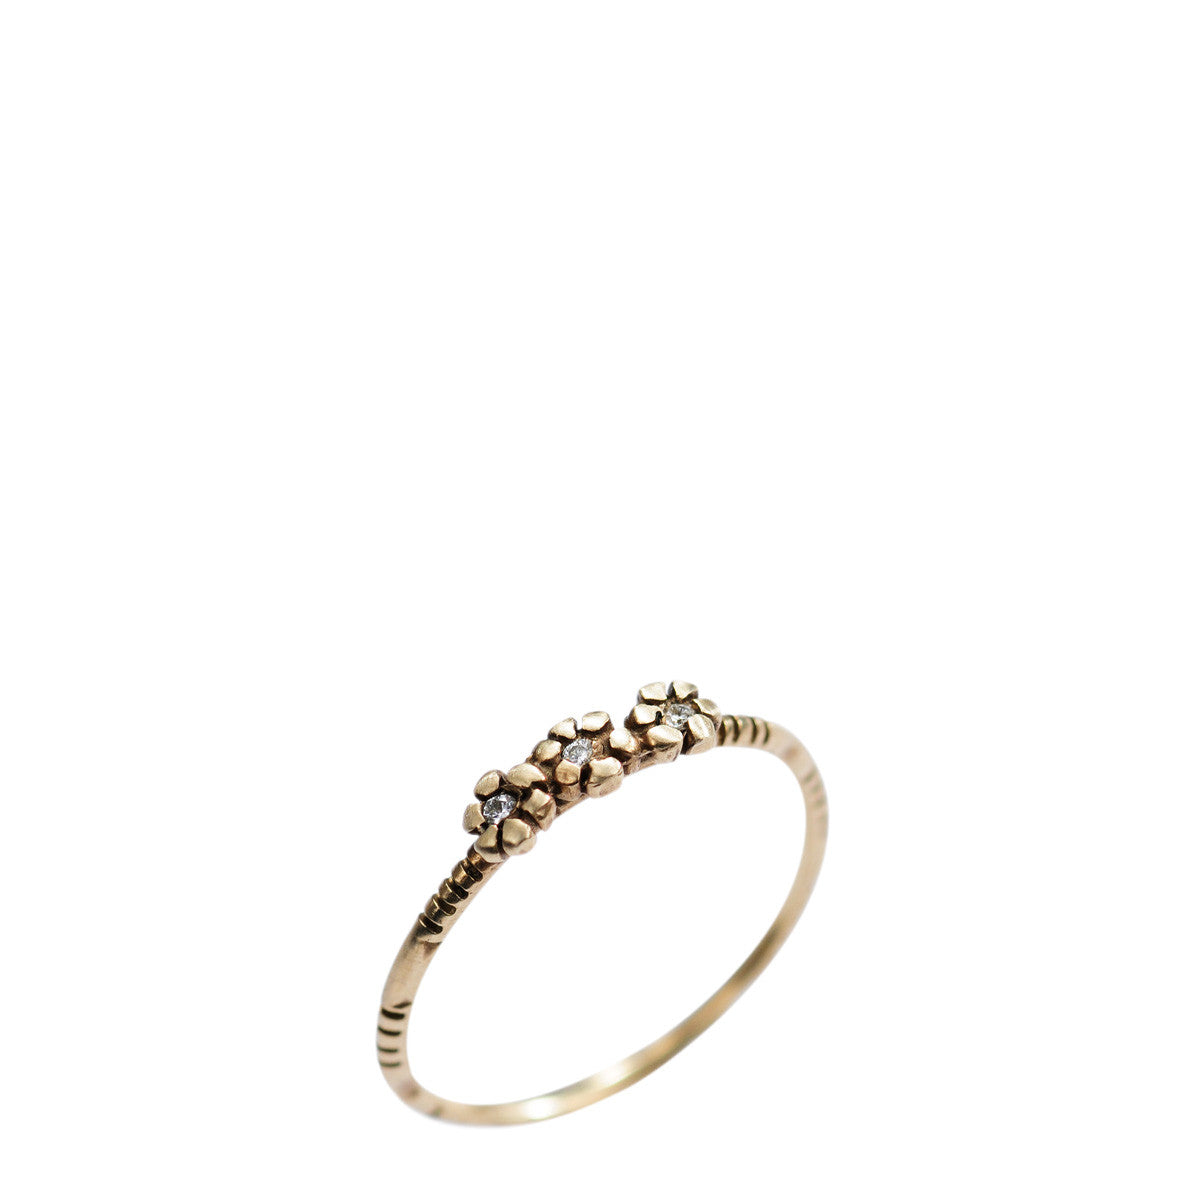 10K Gold Triple Tiny Flower Ring with Diamonds